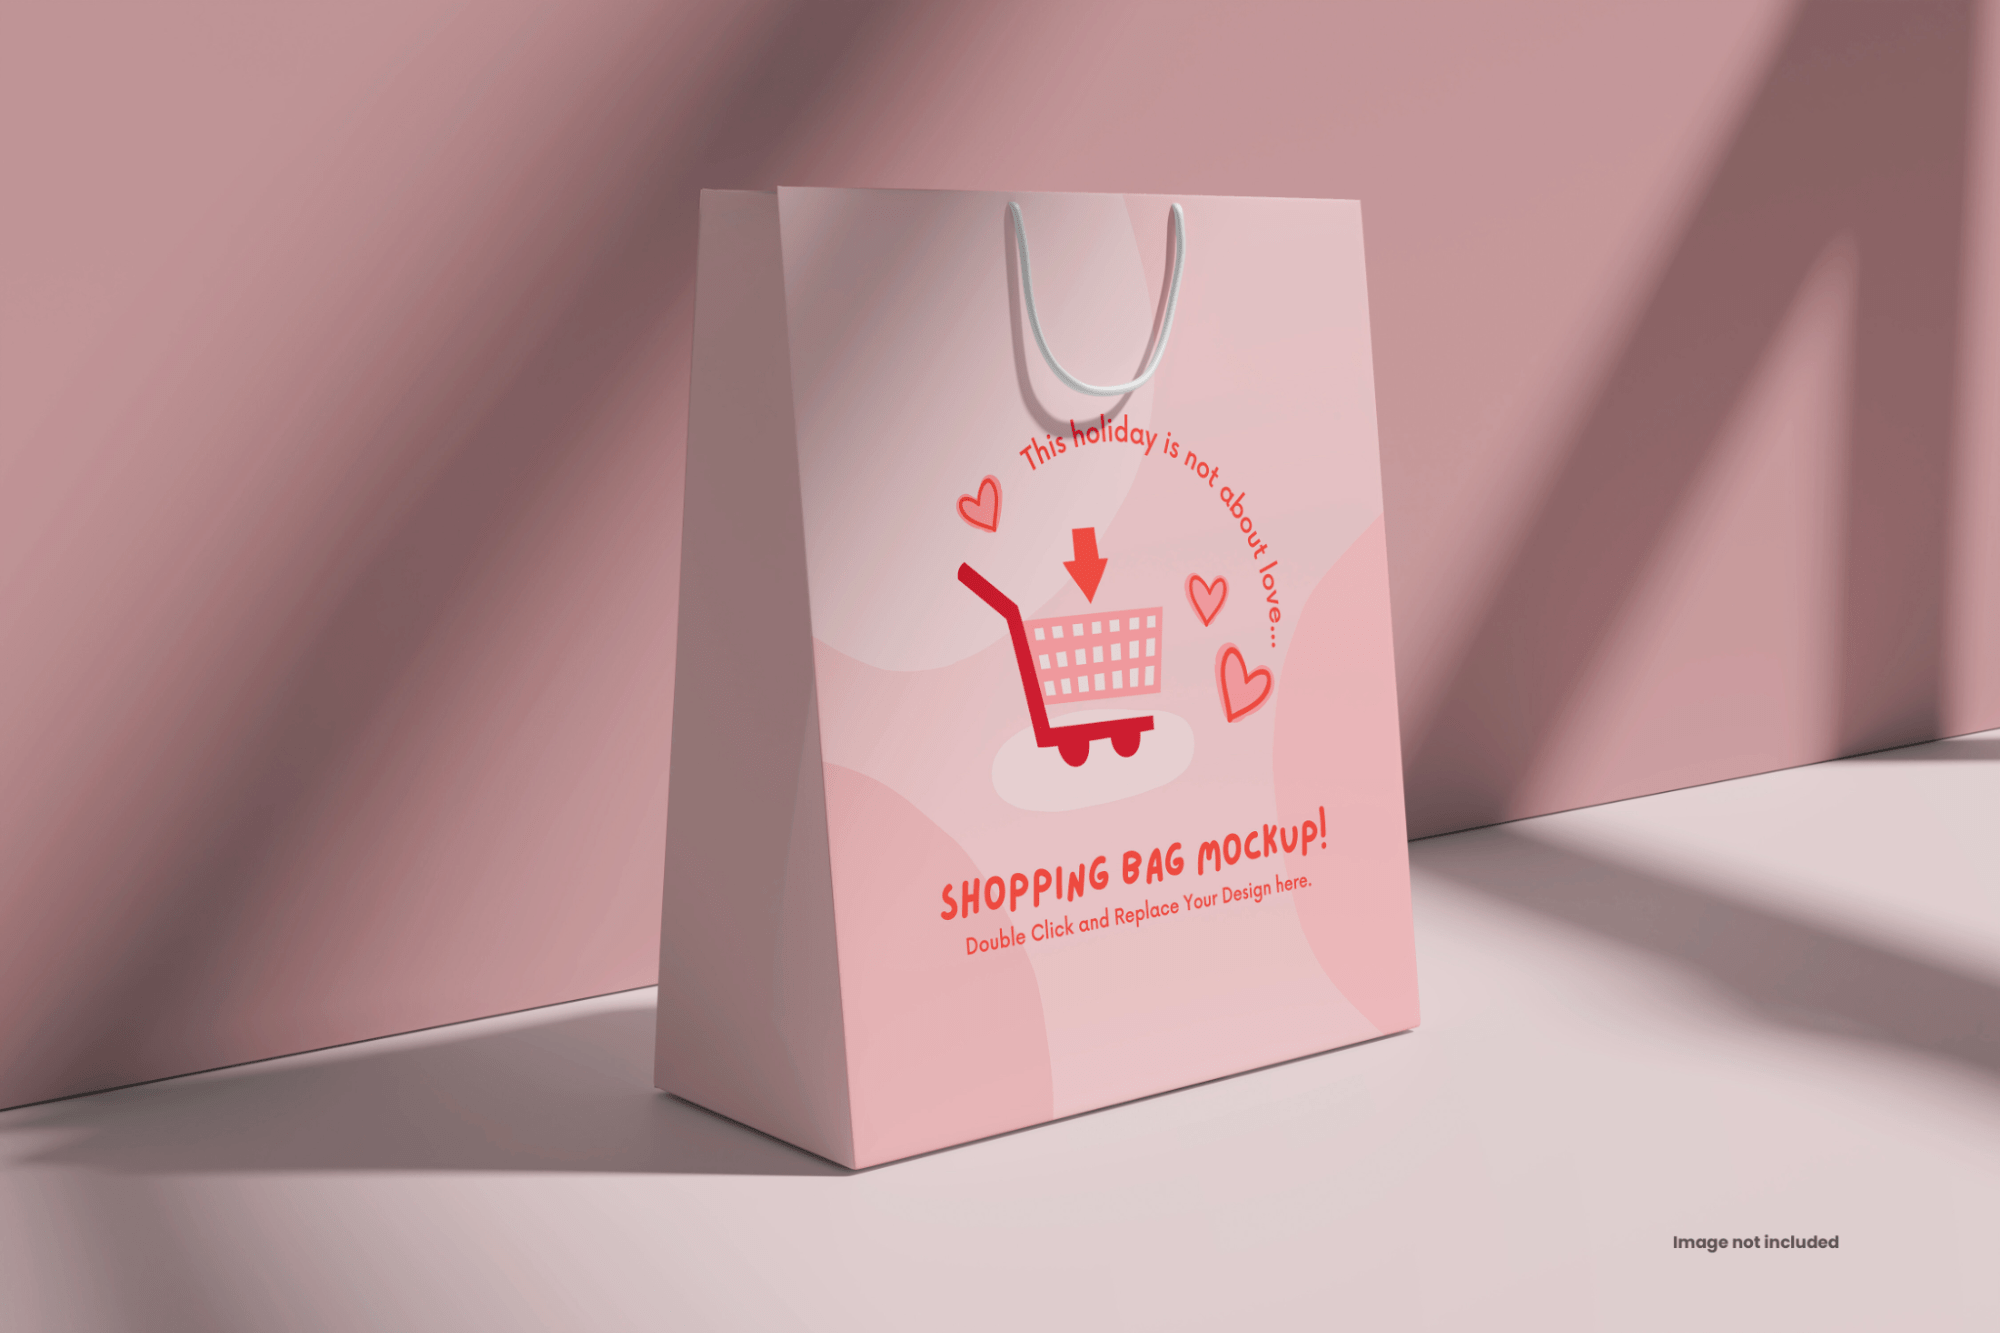 A pale pink paper shopping bag mockup cast in soft lighting, placed against a matching background, ready for branding.